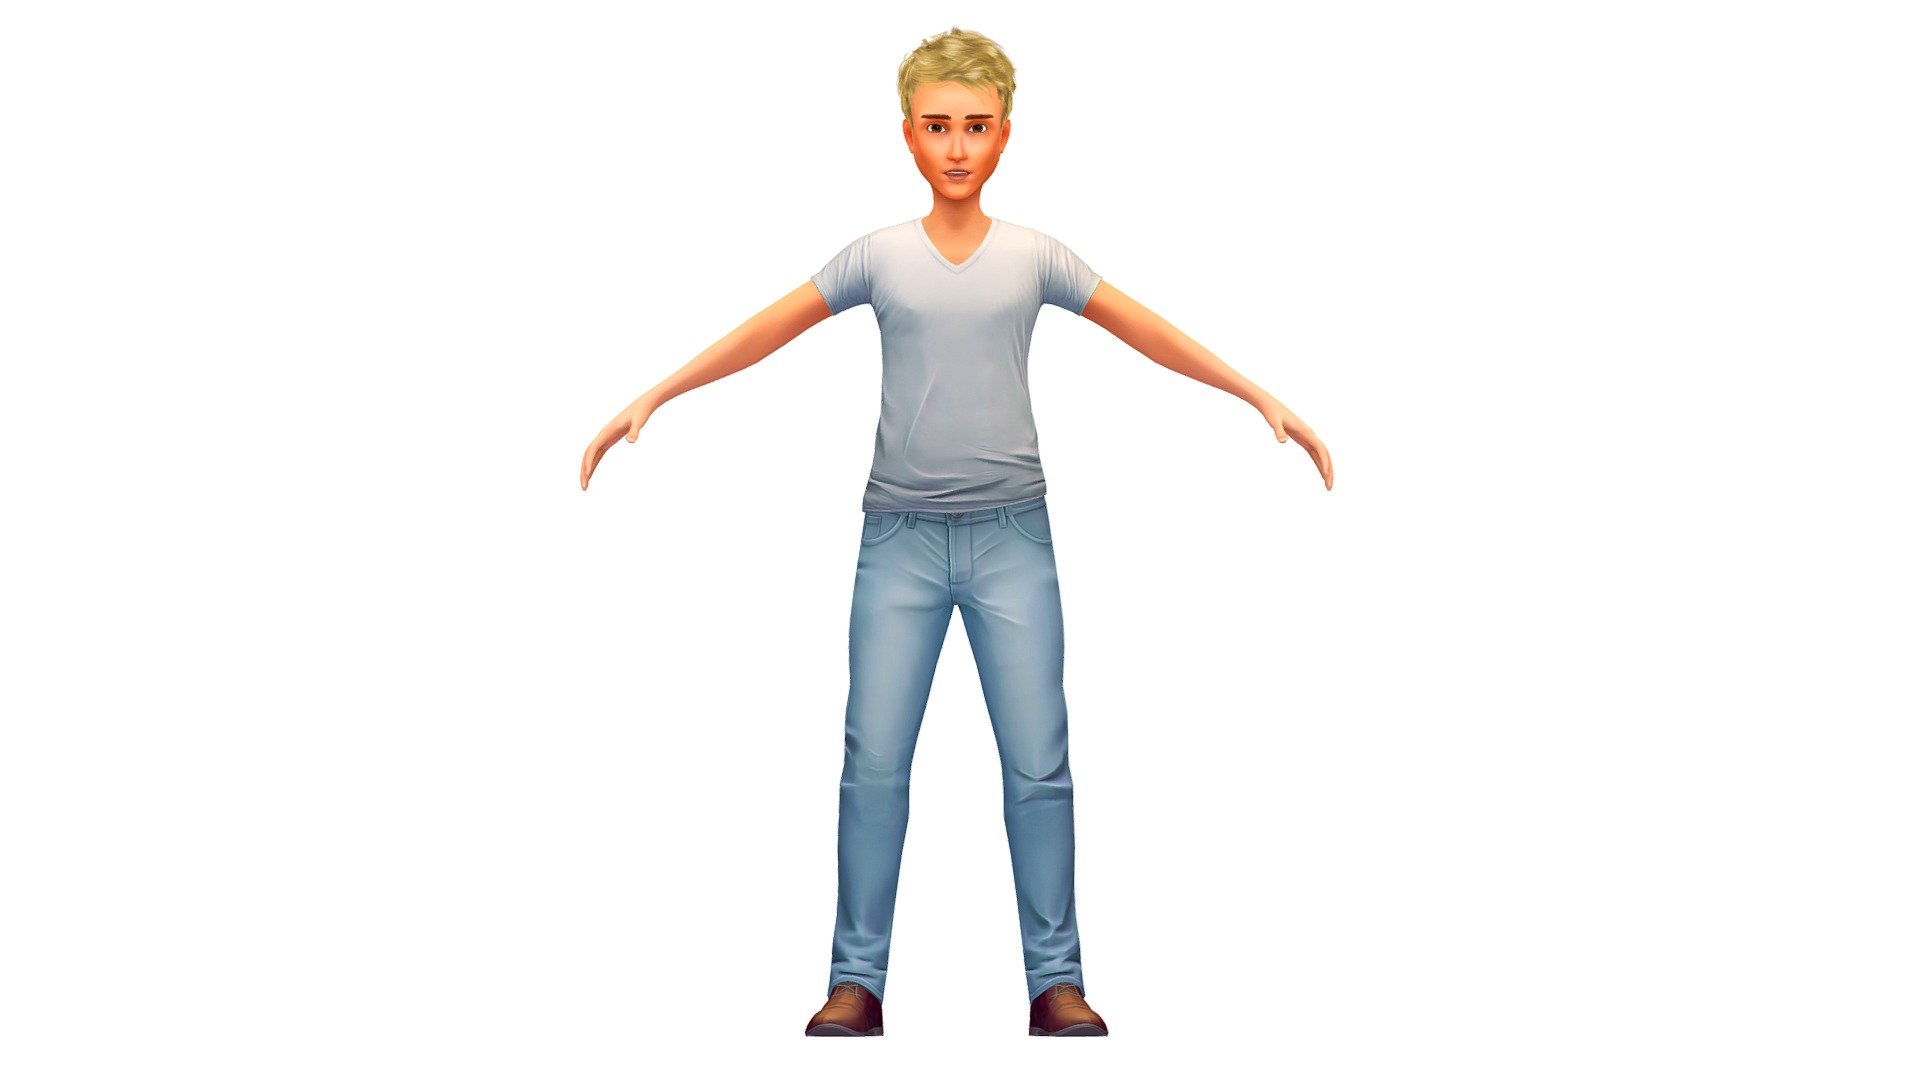 you can combine and match othercombinations using the collection:

hair collection - https://skfb.ly/ovqTn

clotch collection - https://skfb.ly/ovqT7

lowpoly avatar collection - https://skfb.ly/ovqTu - Cartoon Low Poly Style Avatar 010 - Buy Royalty Free 3D model by Oleg Shuldiakov (@olegshuldiakov) 3d model